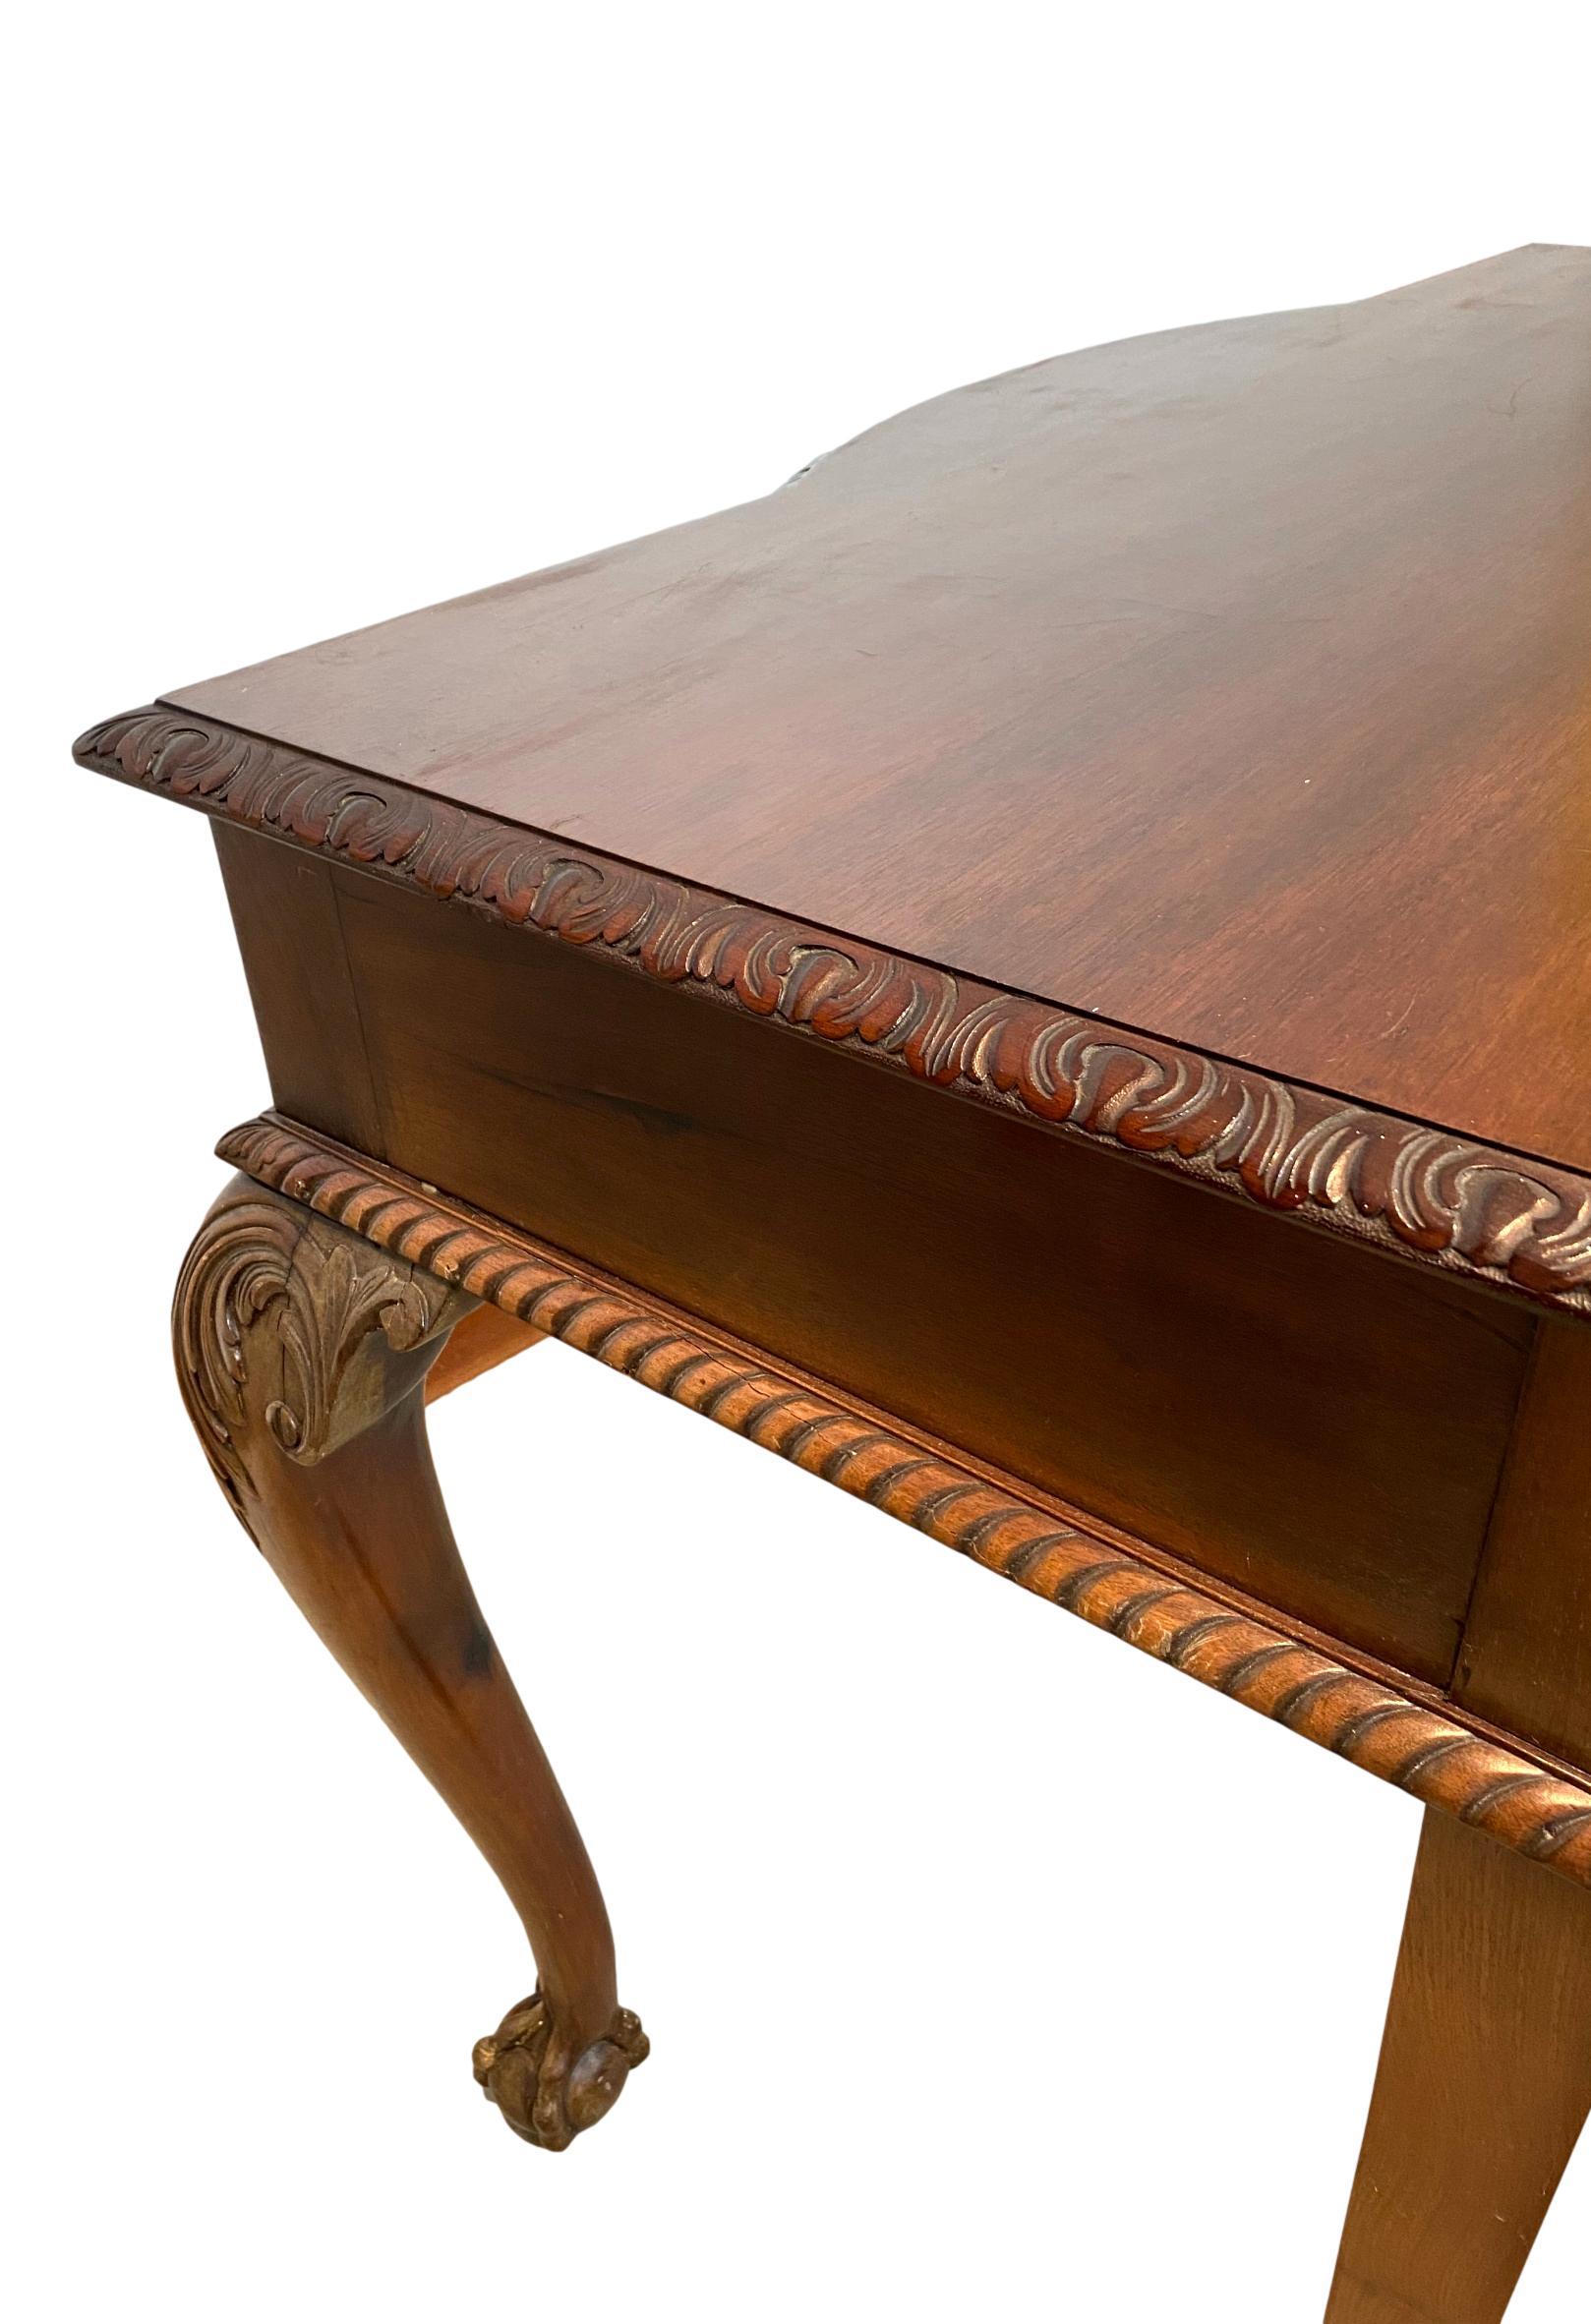 Chippendale Revival Mahogany Three-Drawer Console Table, English, circa 1880 For Sale 2